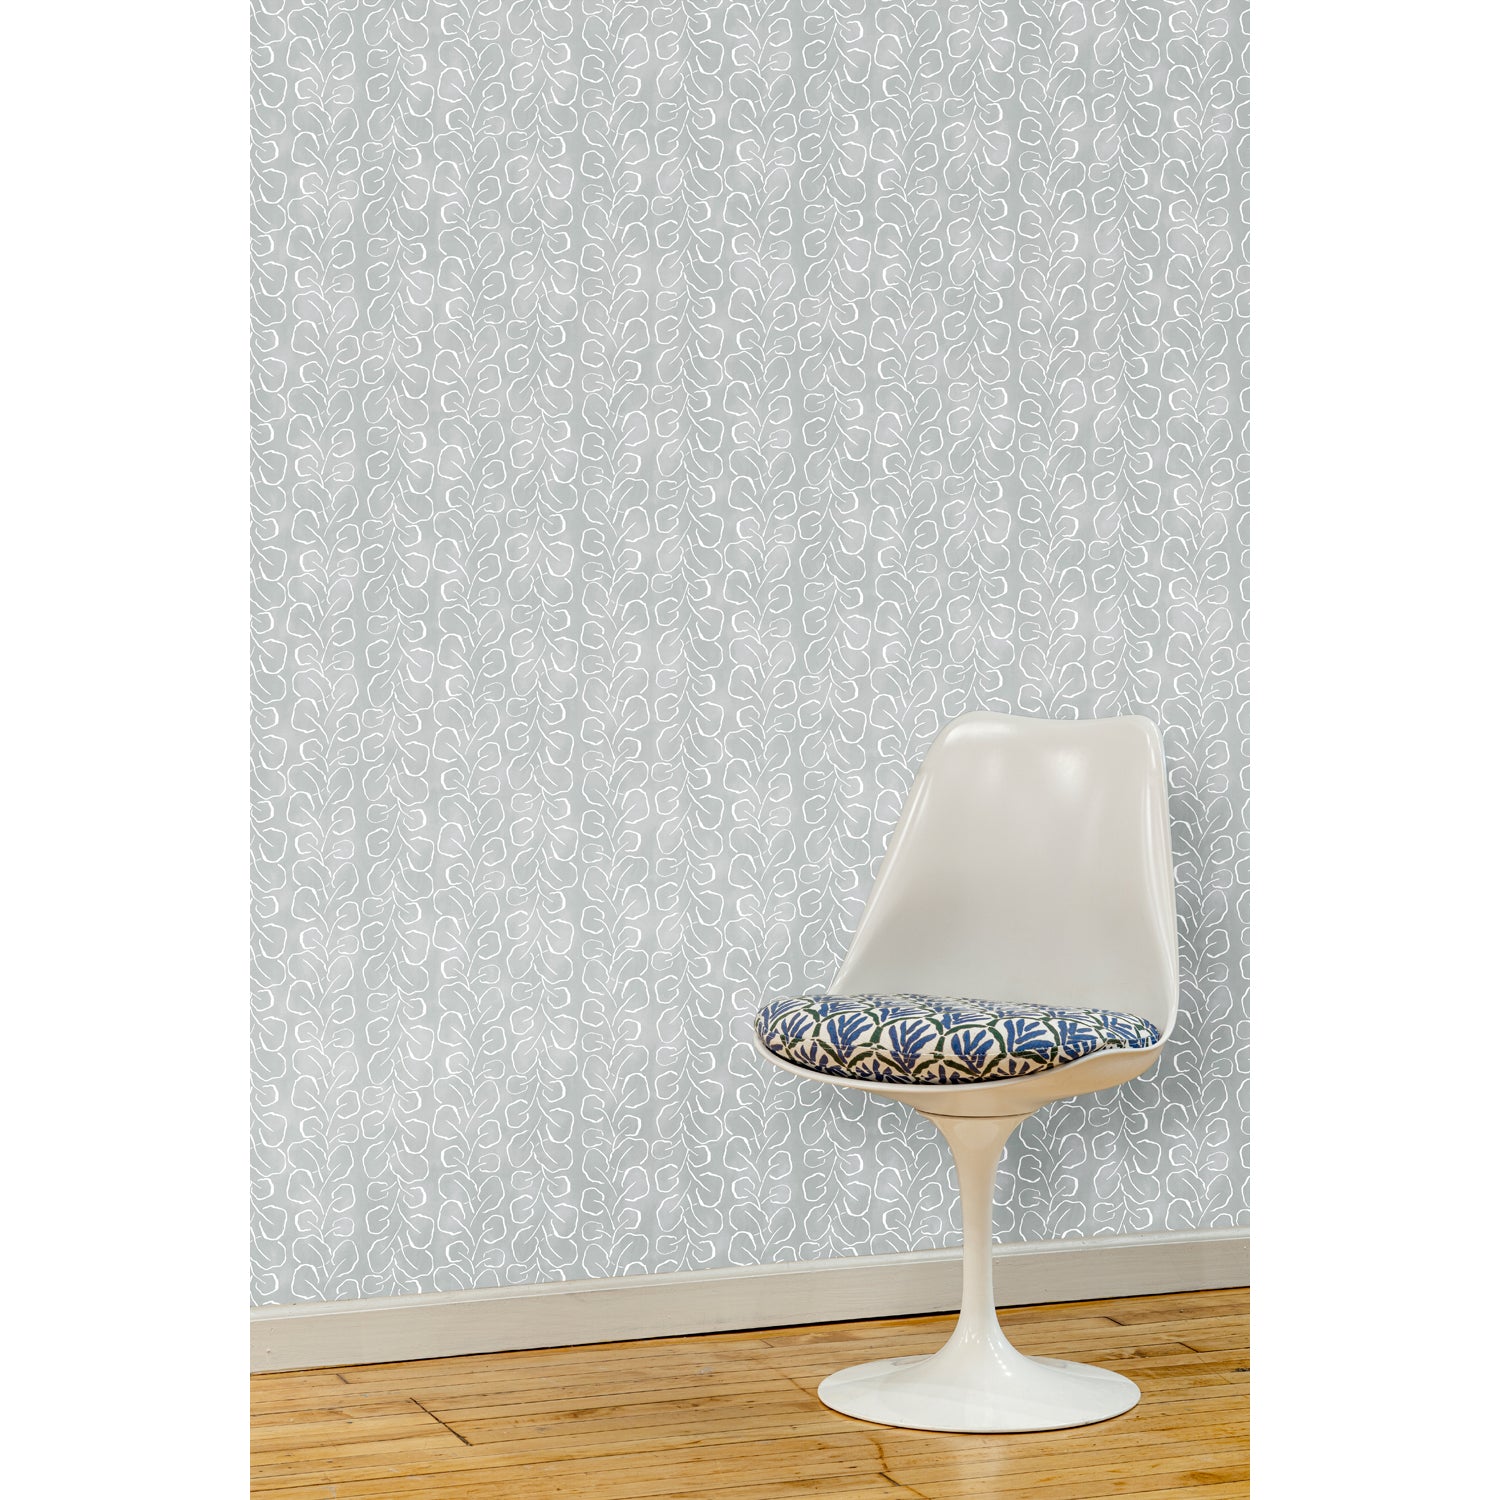 A white swivel chair in front of a wall papered in a large-scale repeating leaf print in white on a blue-gray watercolor background.